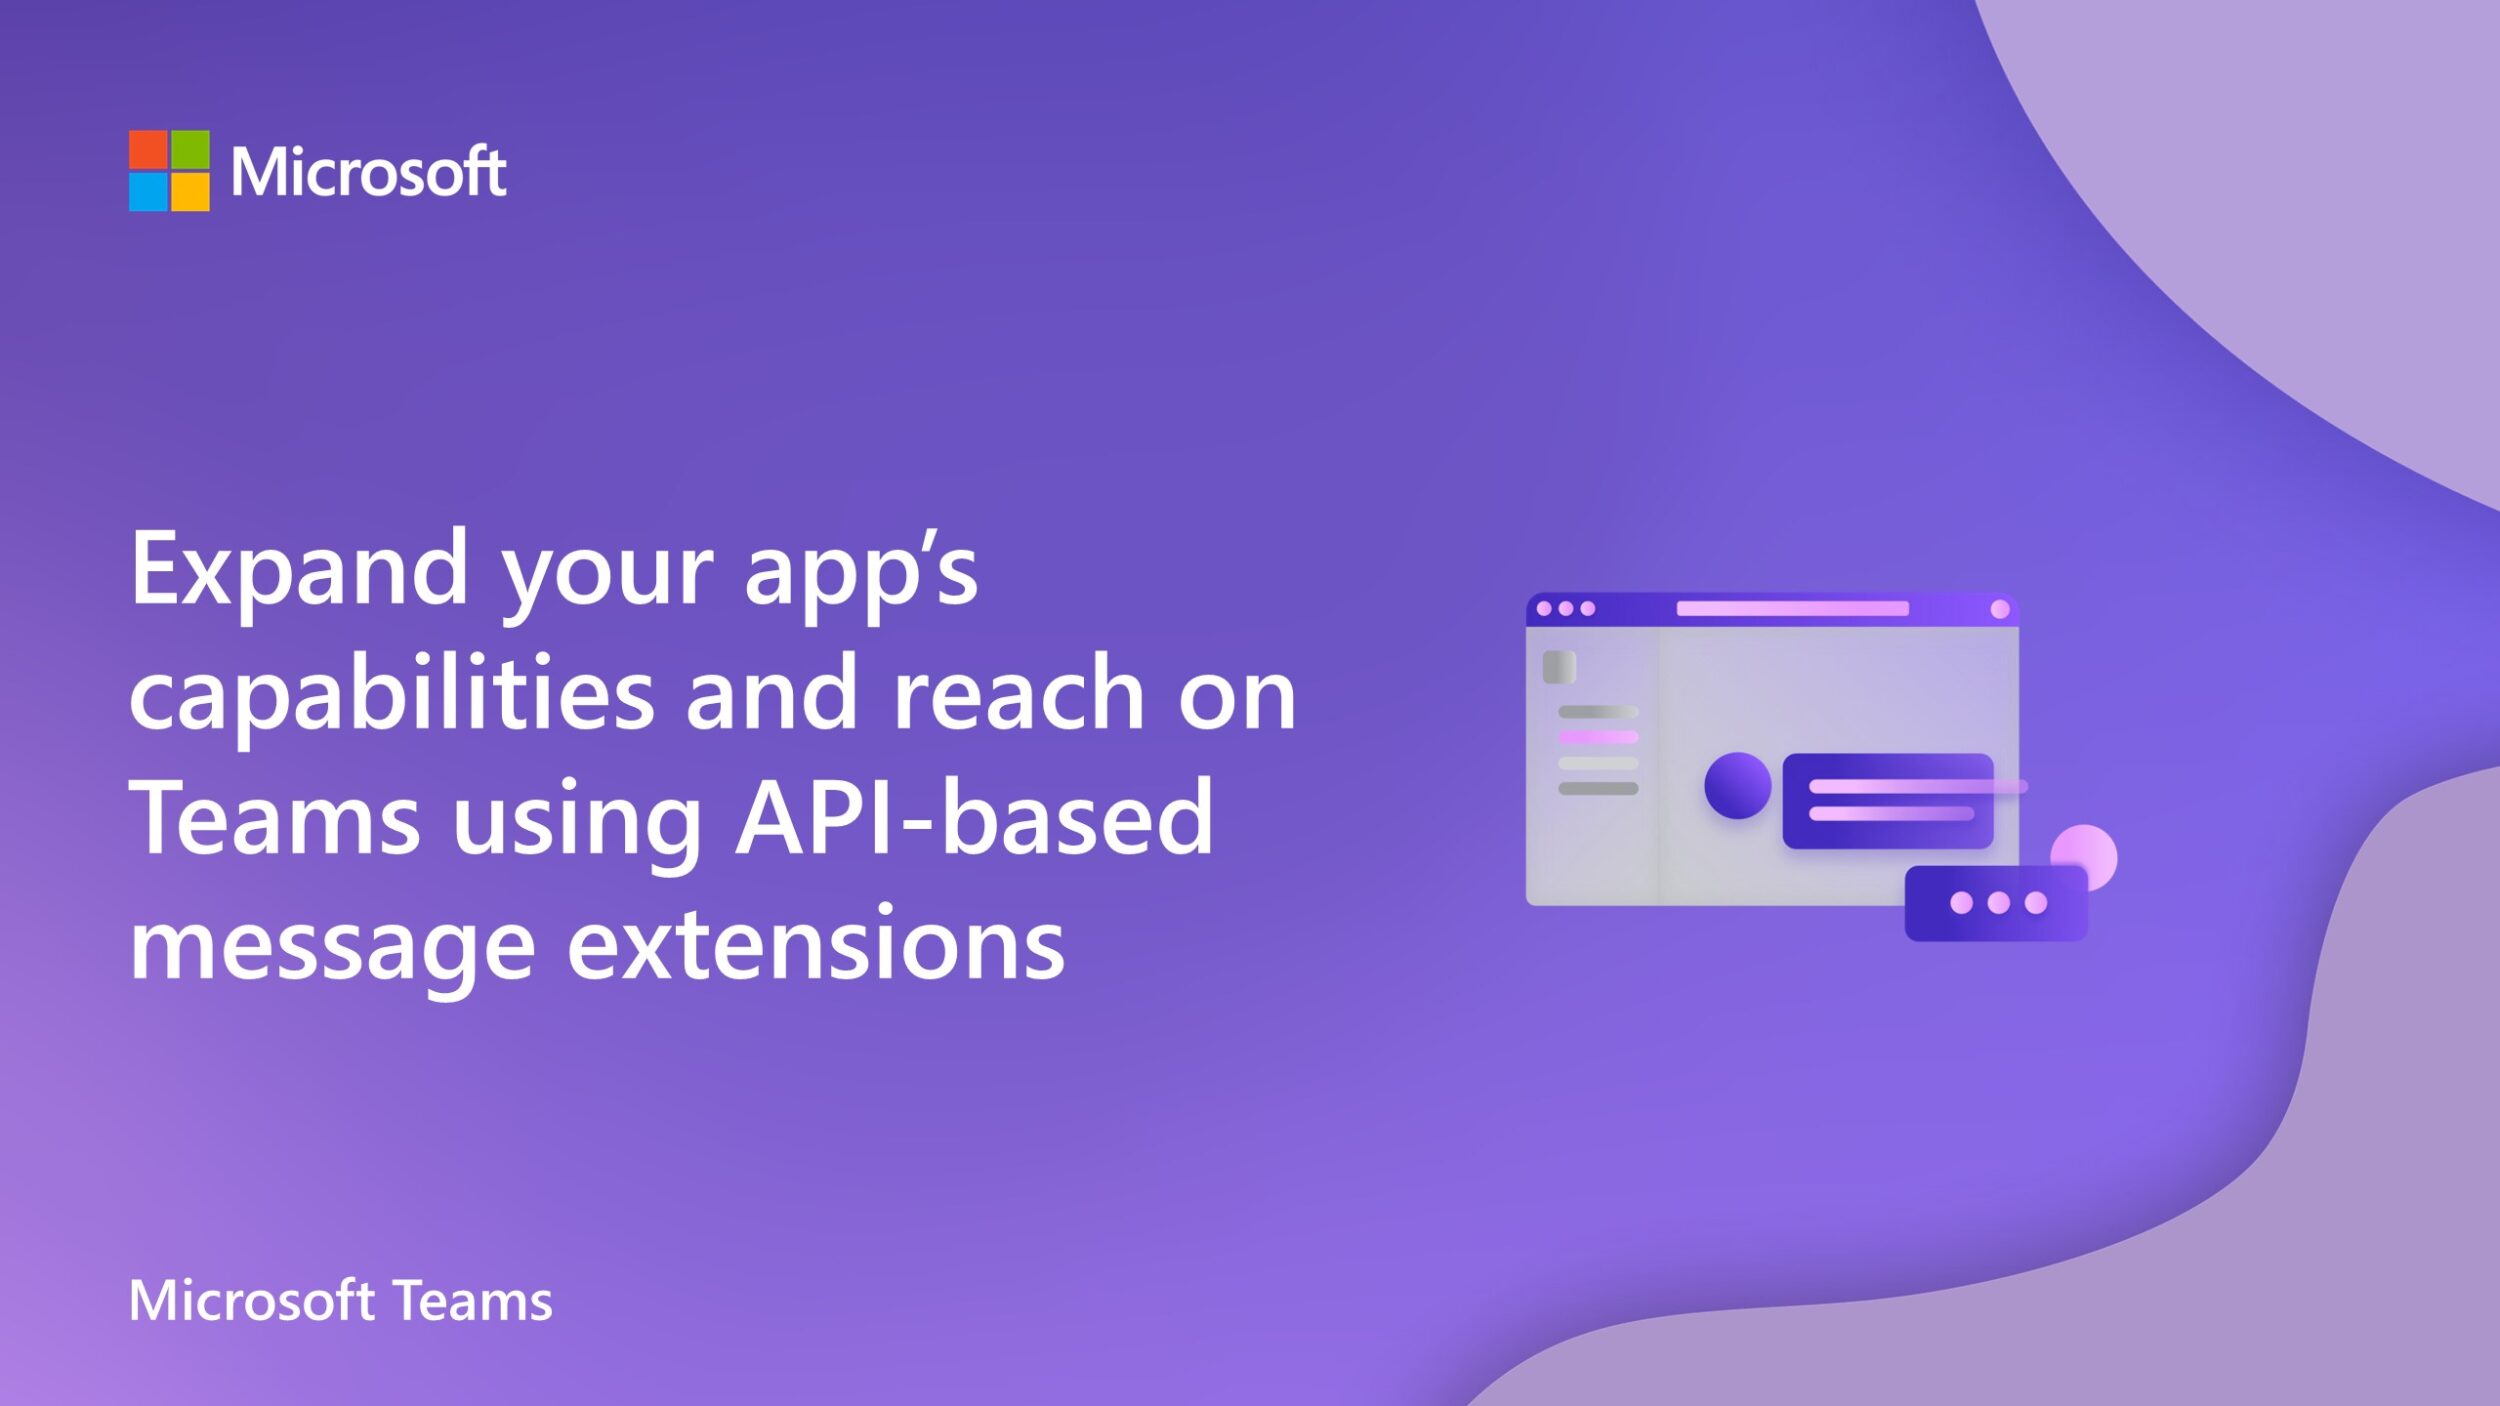 Expand your app’s capabilities and reach on Microsoft Teams using API-based message extensions